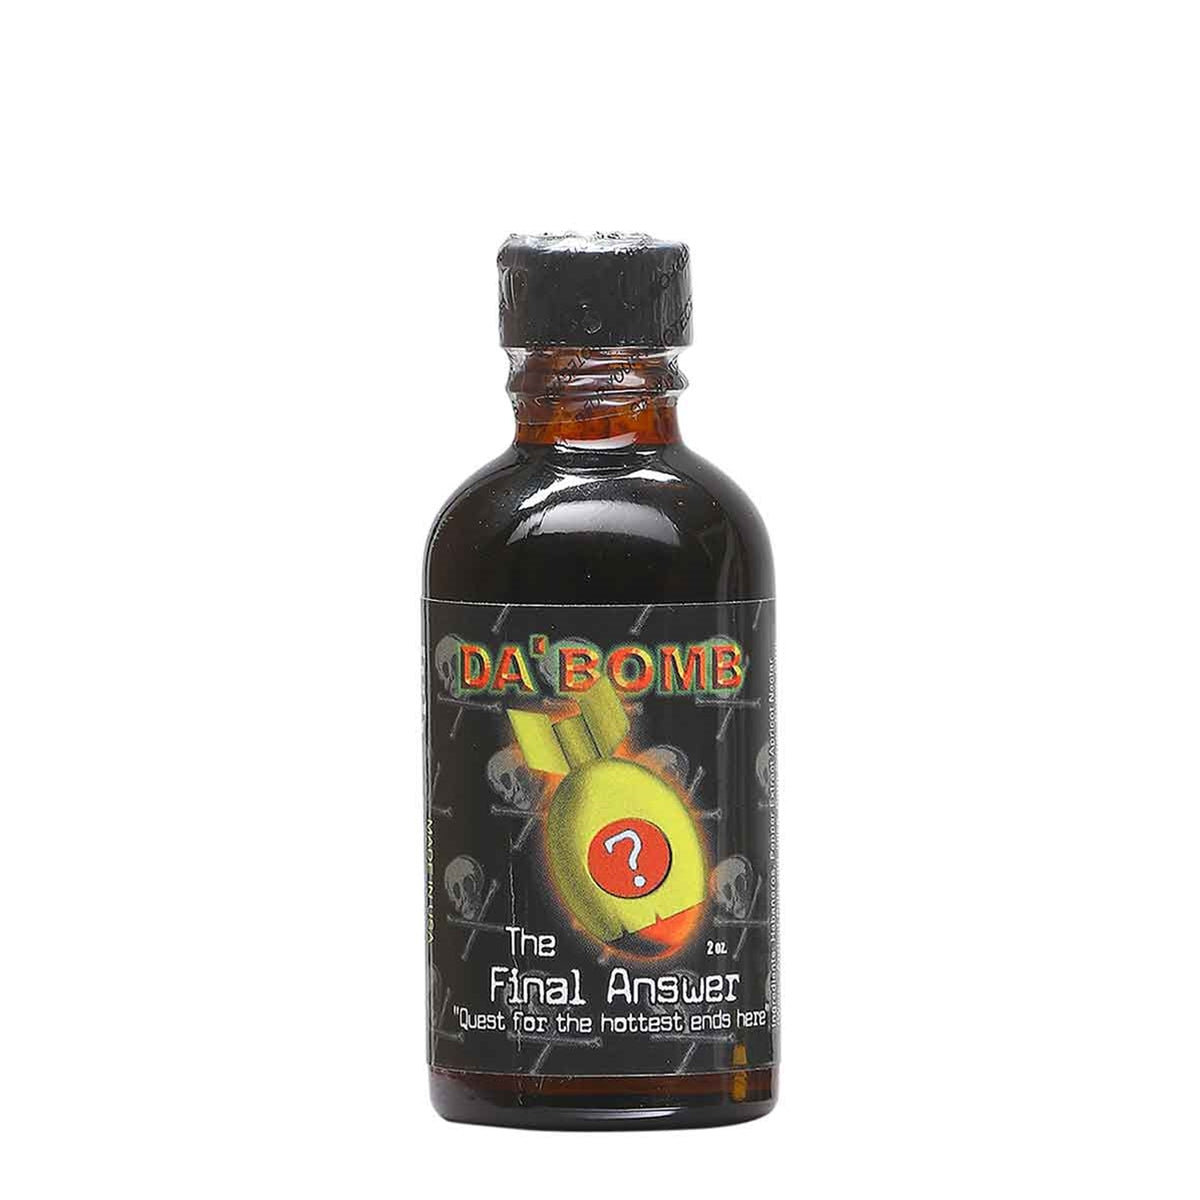 Hot Sauce Da Bomb Final Answer 2 oz Quest for the hottest end here Heat 10+++ Extract $78.98